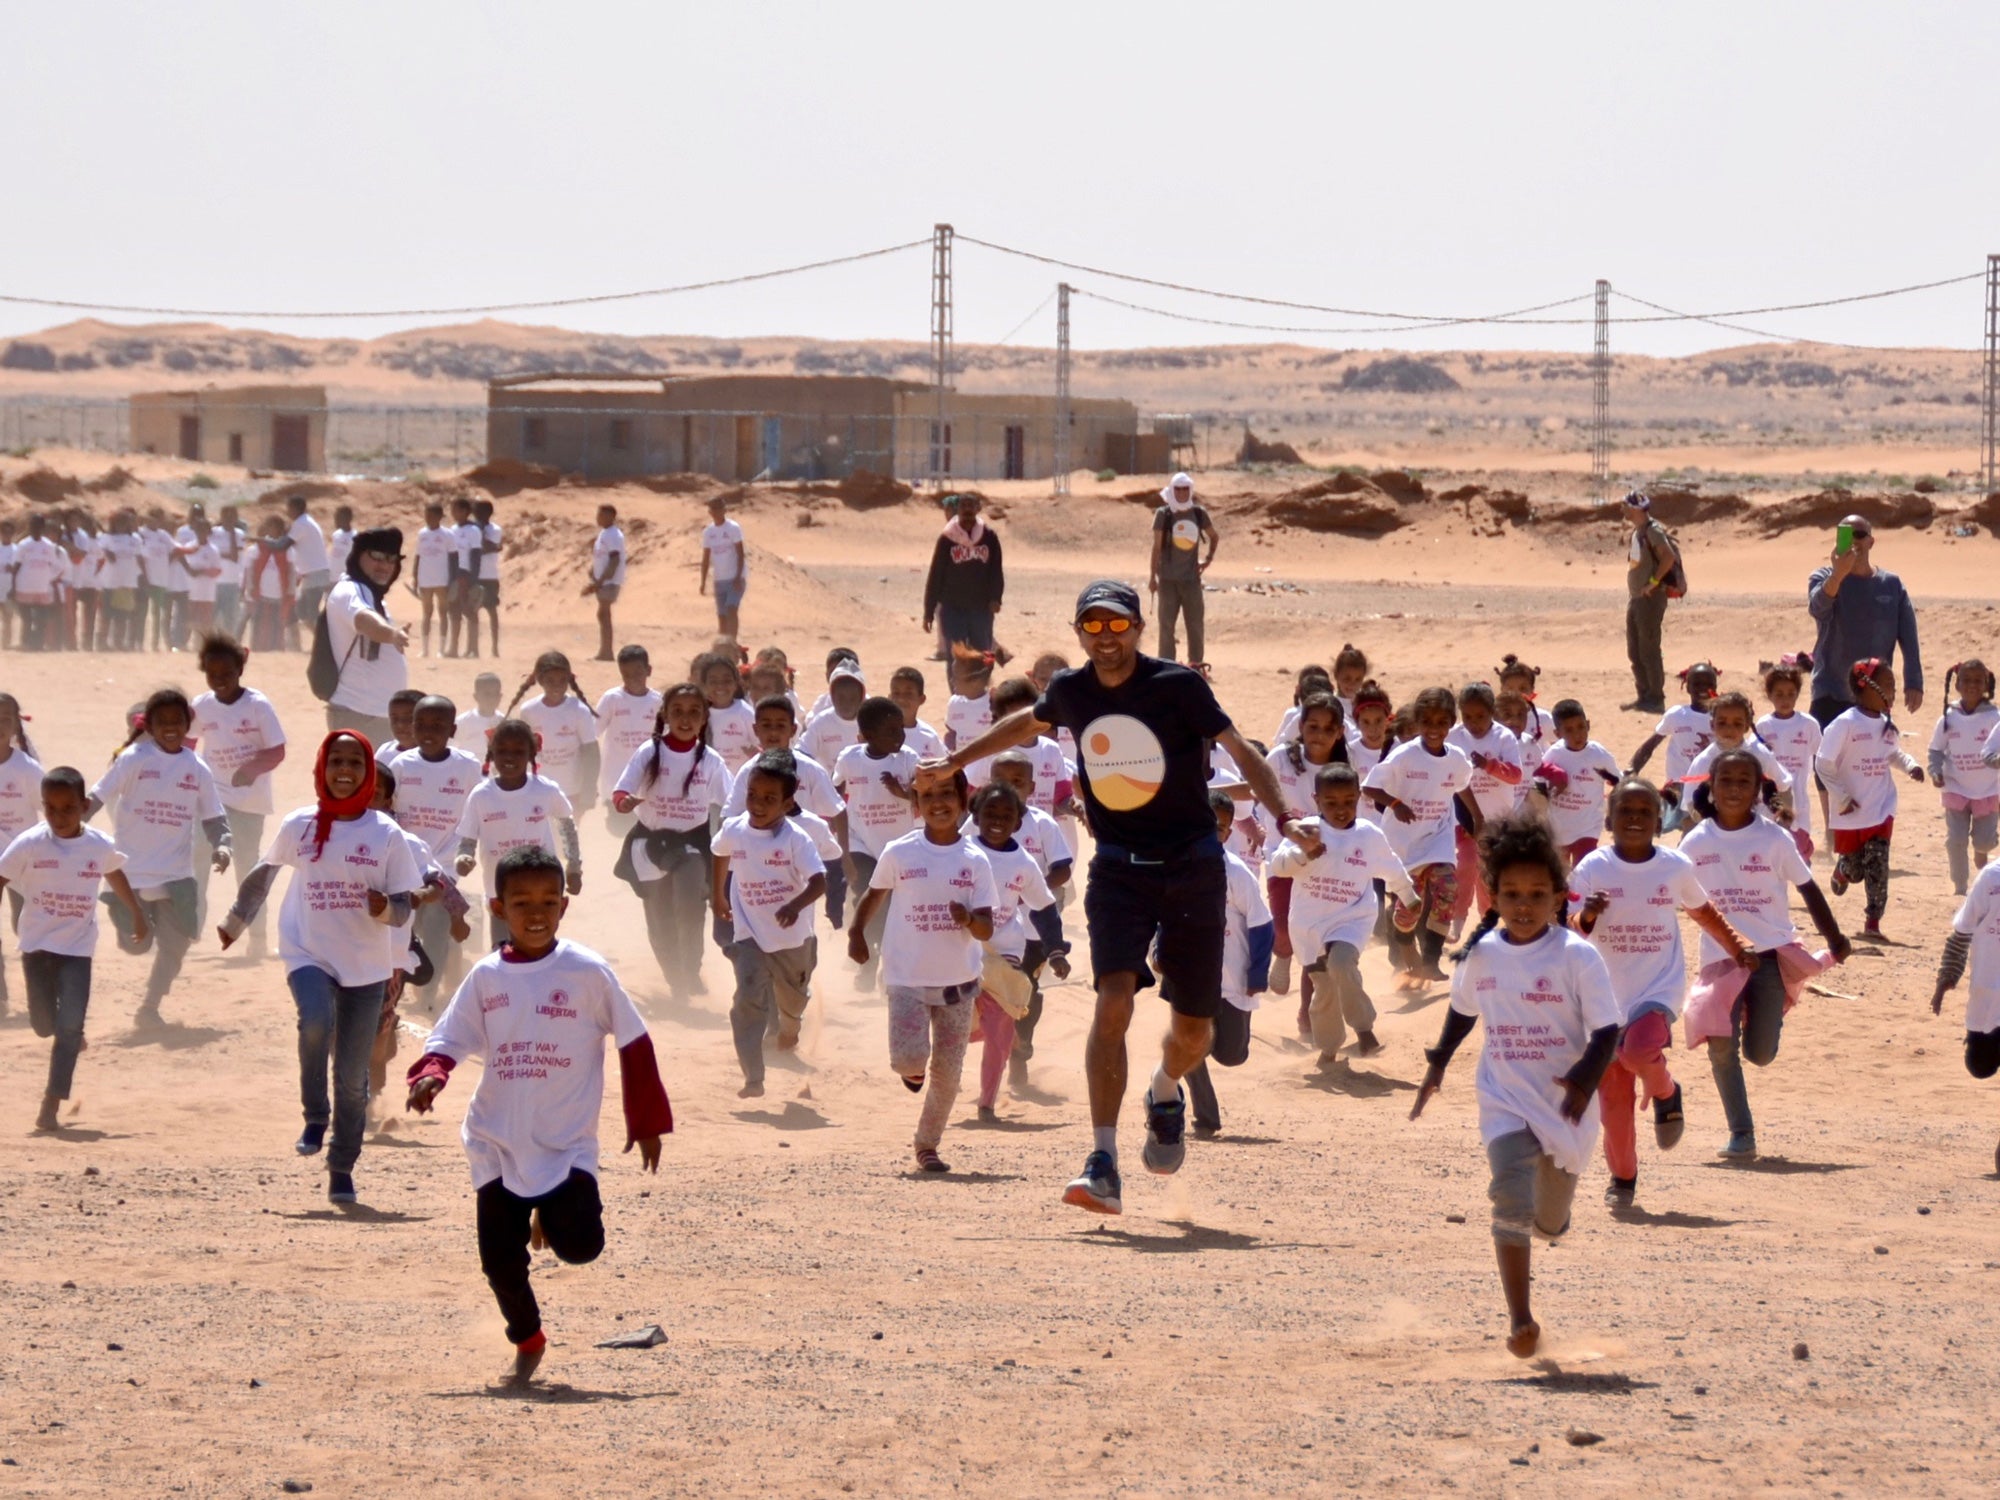 Why a marathon is held among the refugee camps in the Sahara desert